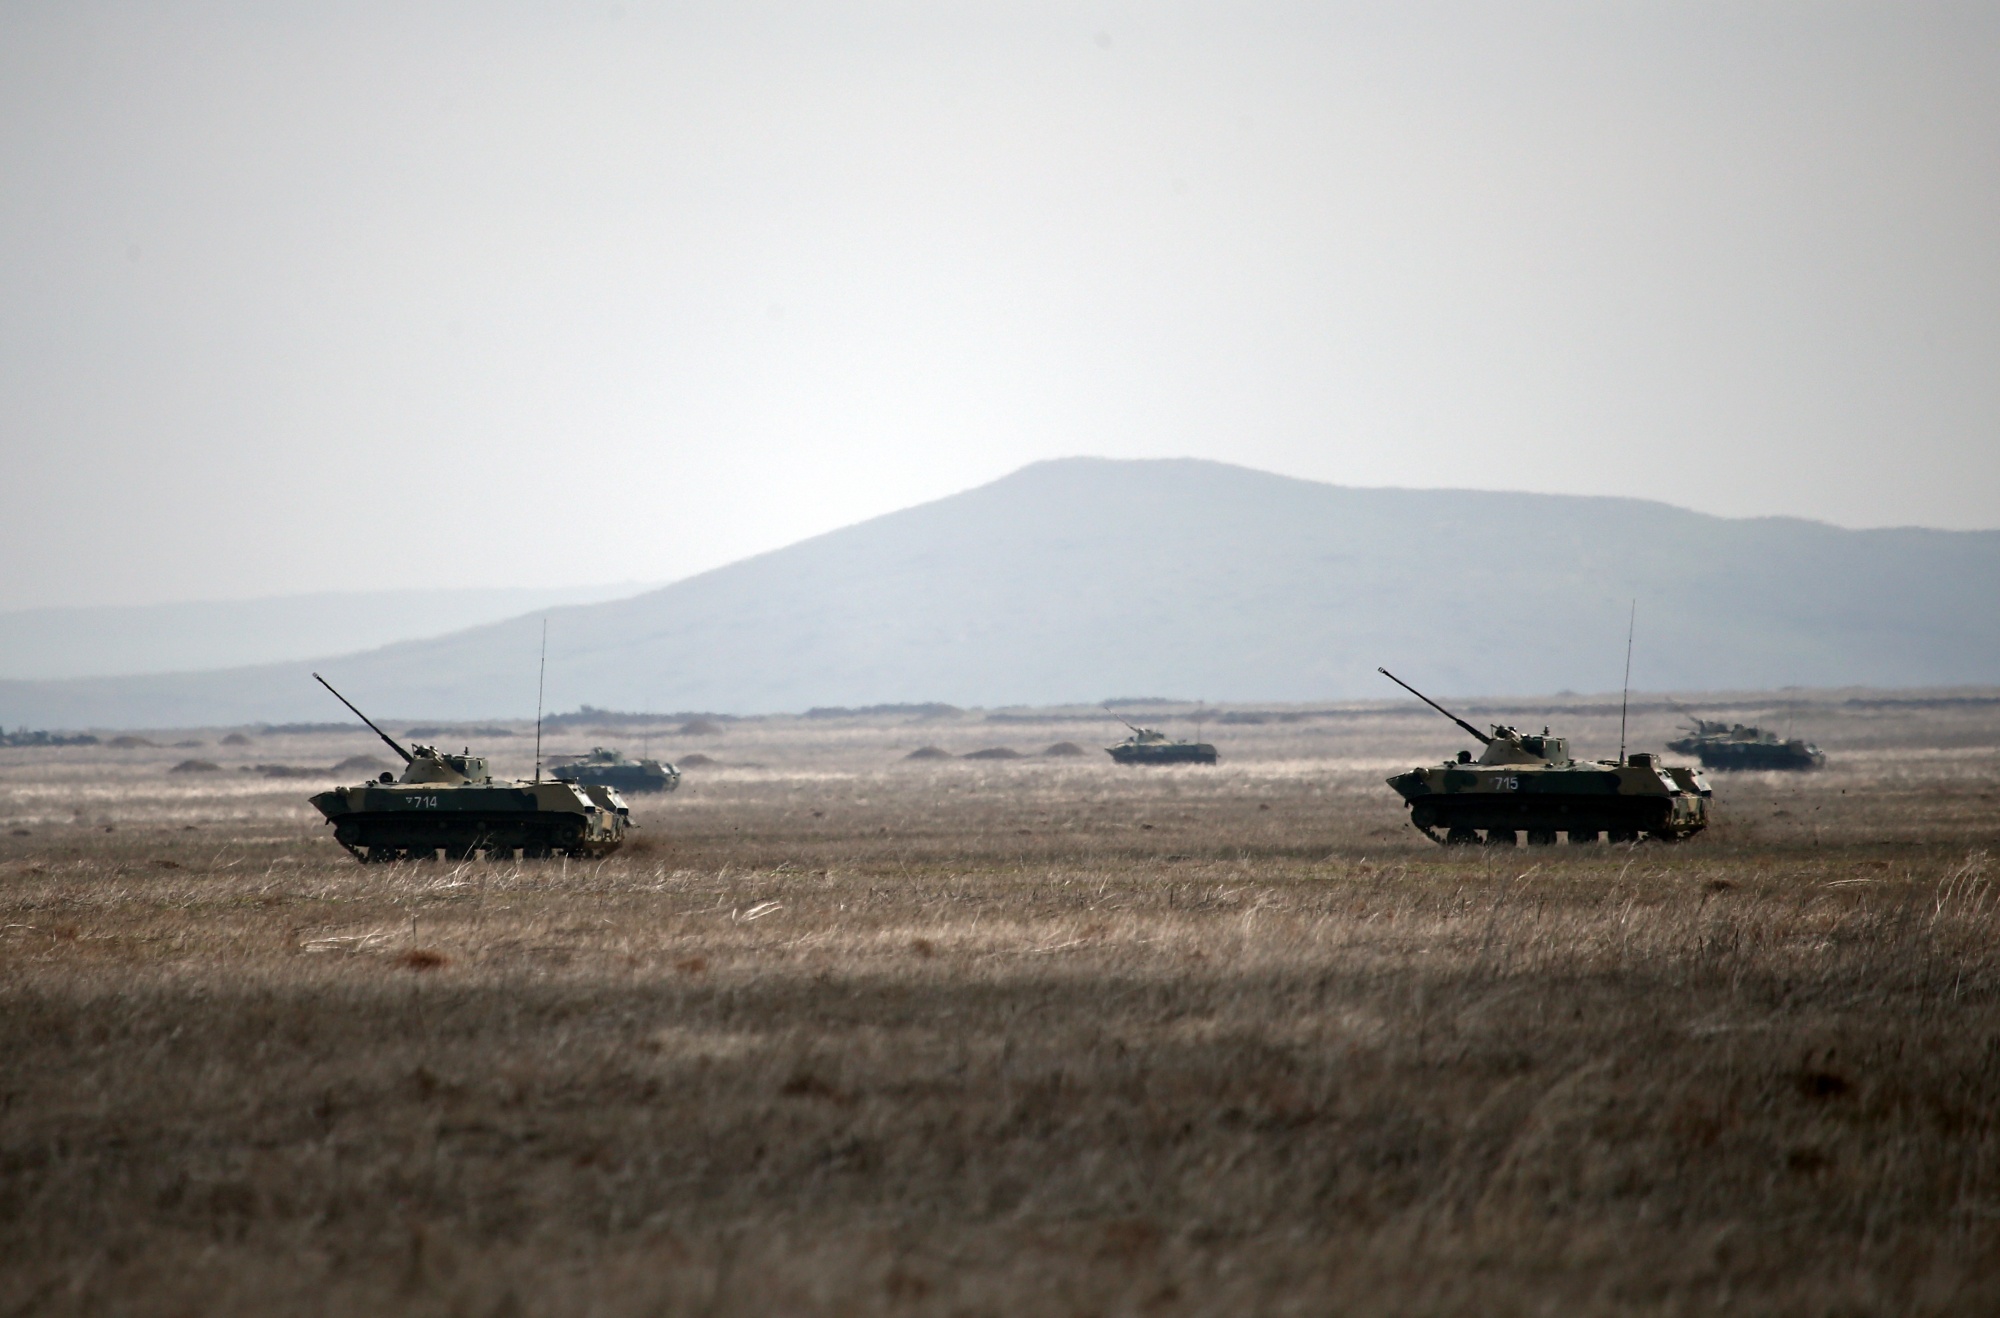 2S9-1 Nona self-propelled mortars take part in an exercise held by units of the Novorossiysk guards mountain air assault division of the Russian Airborne Troops at Opuk range.